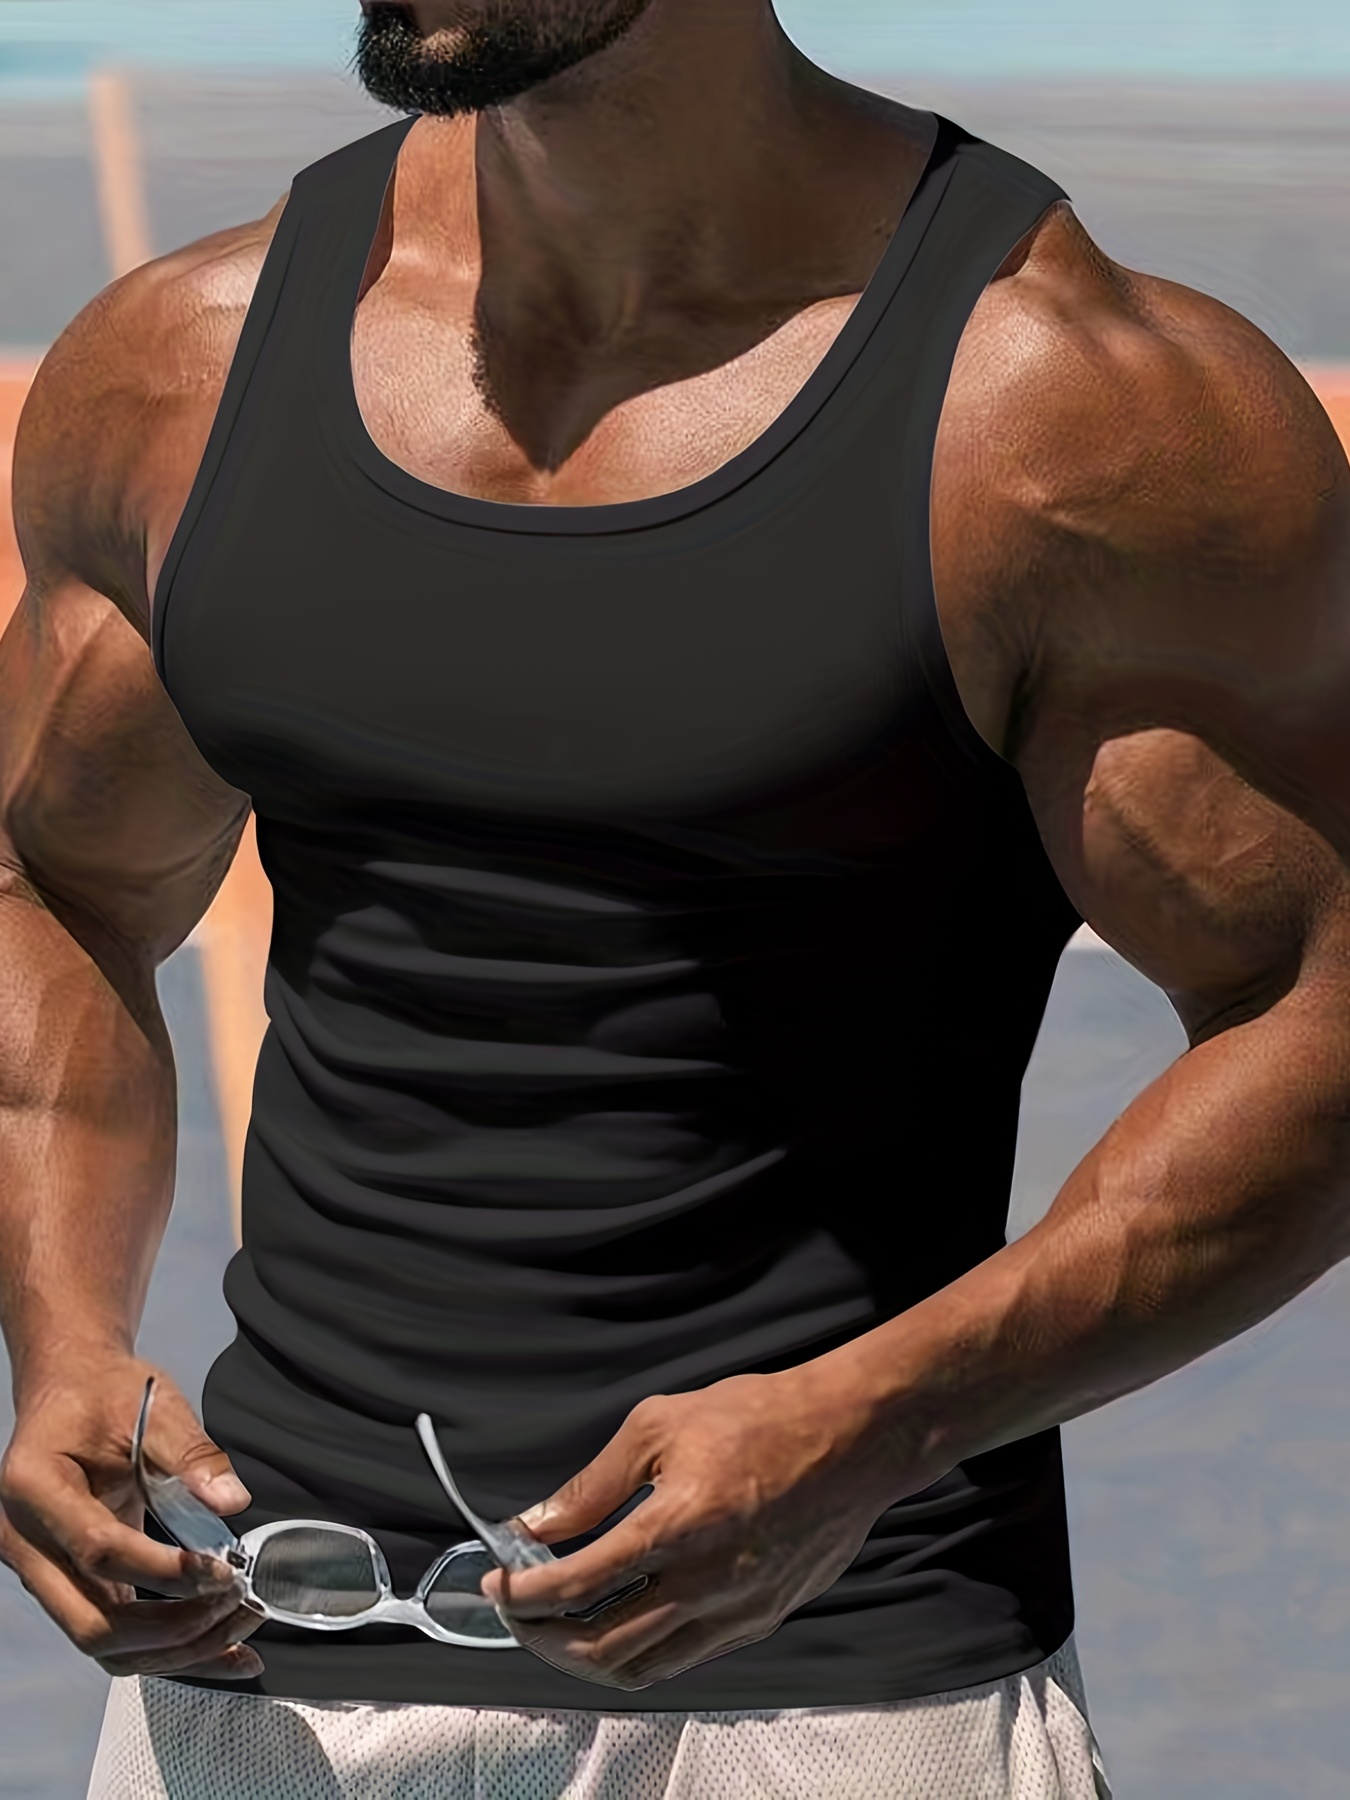 T-shirts Sleeveless Men Tops Camisole Tank Tops Muscle Vests